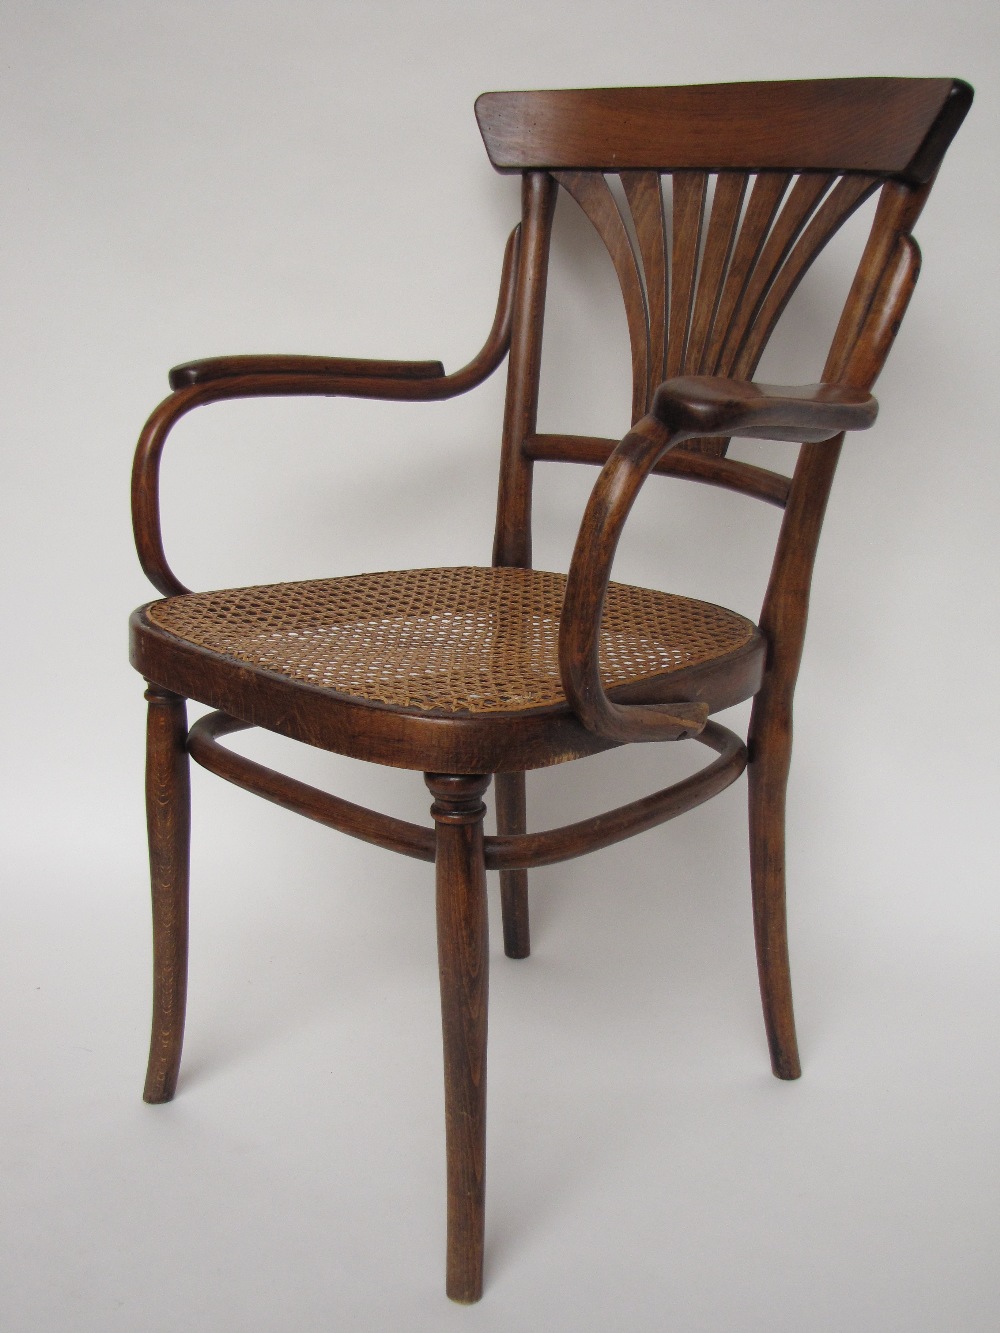 An early 20th Century Thonet bentwood open elbow chair with caned seat, stamped Thonet.